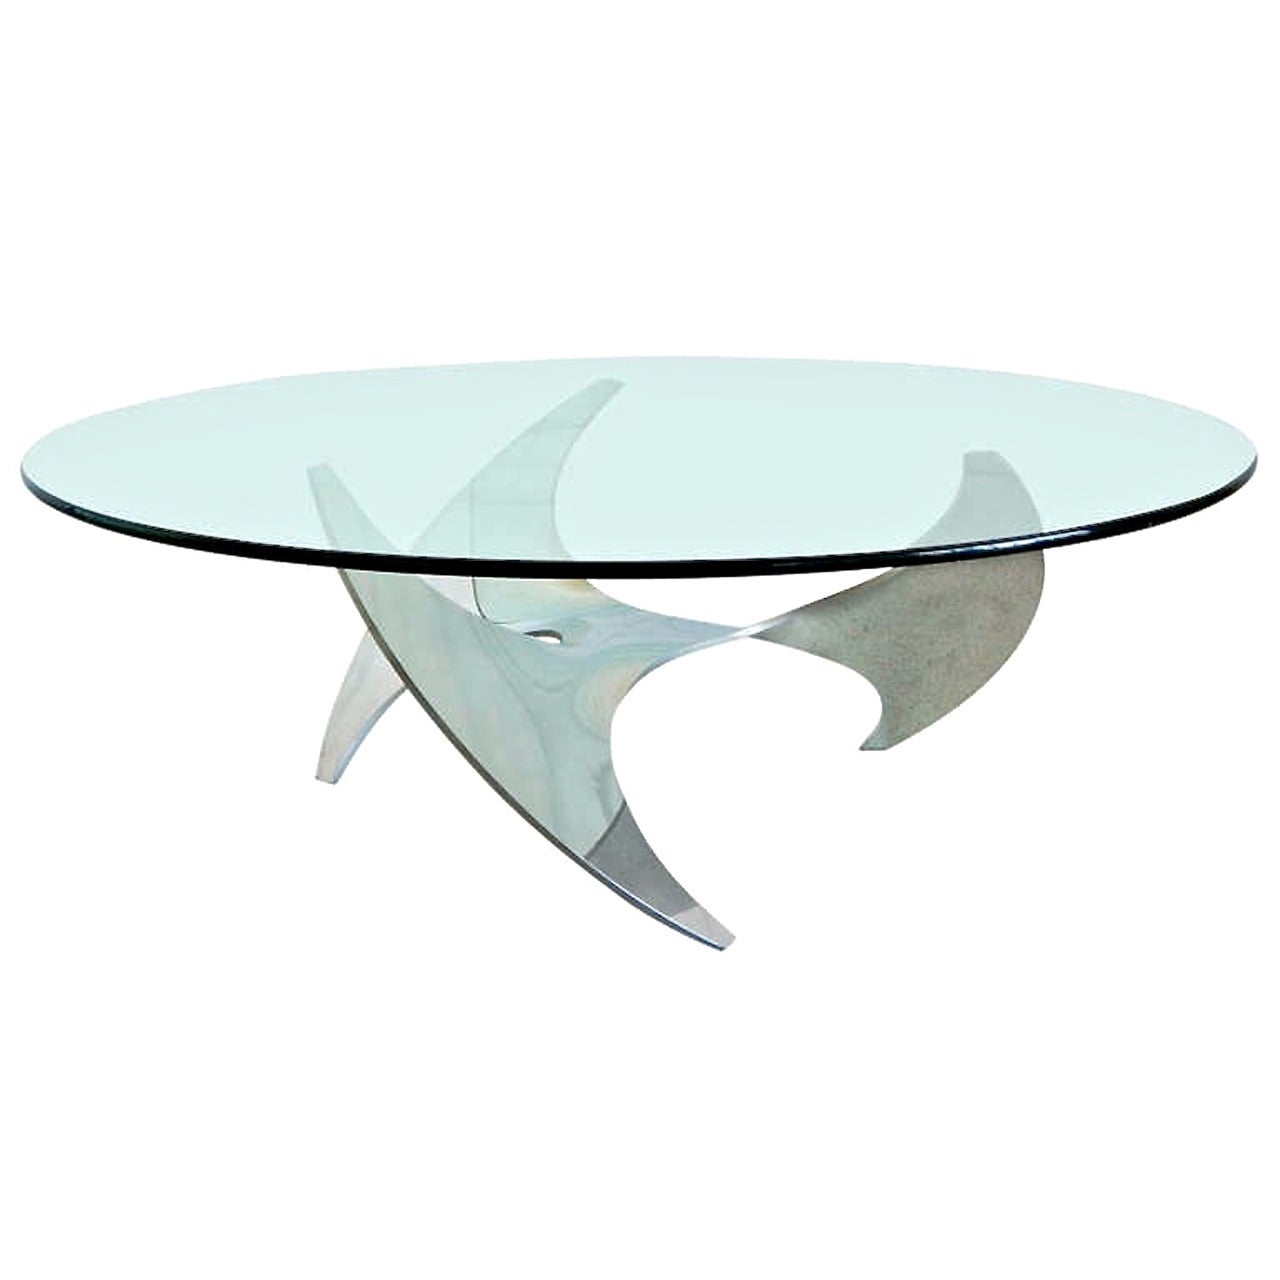 Propeller Cocktail Table by Knut Hesterberg